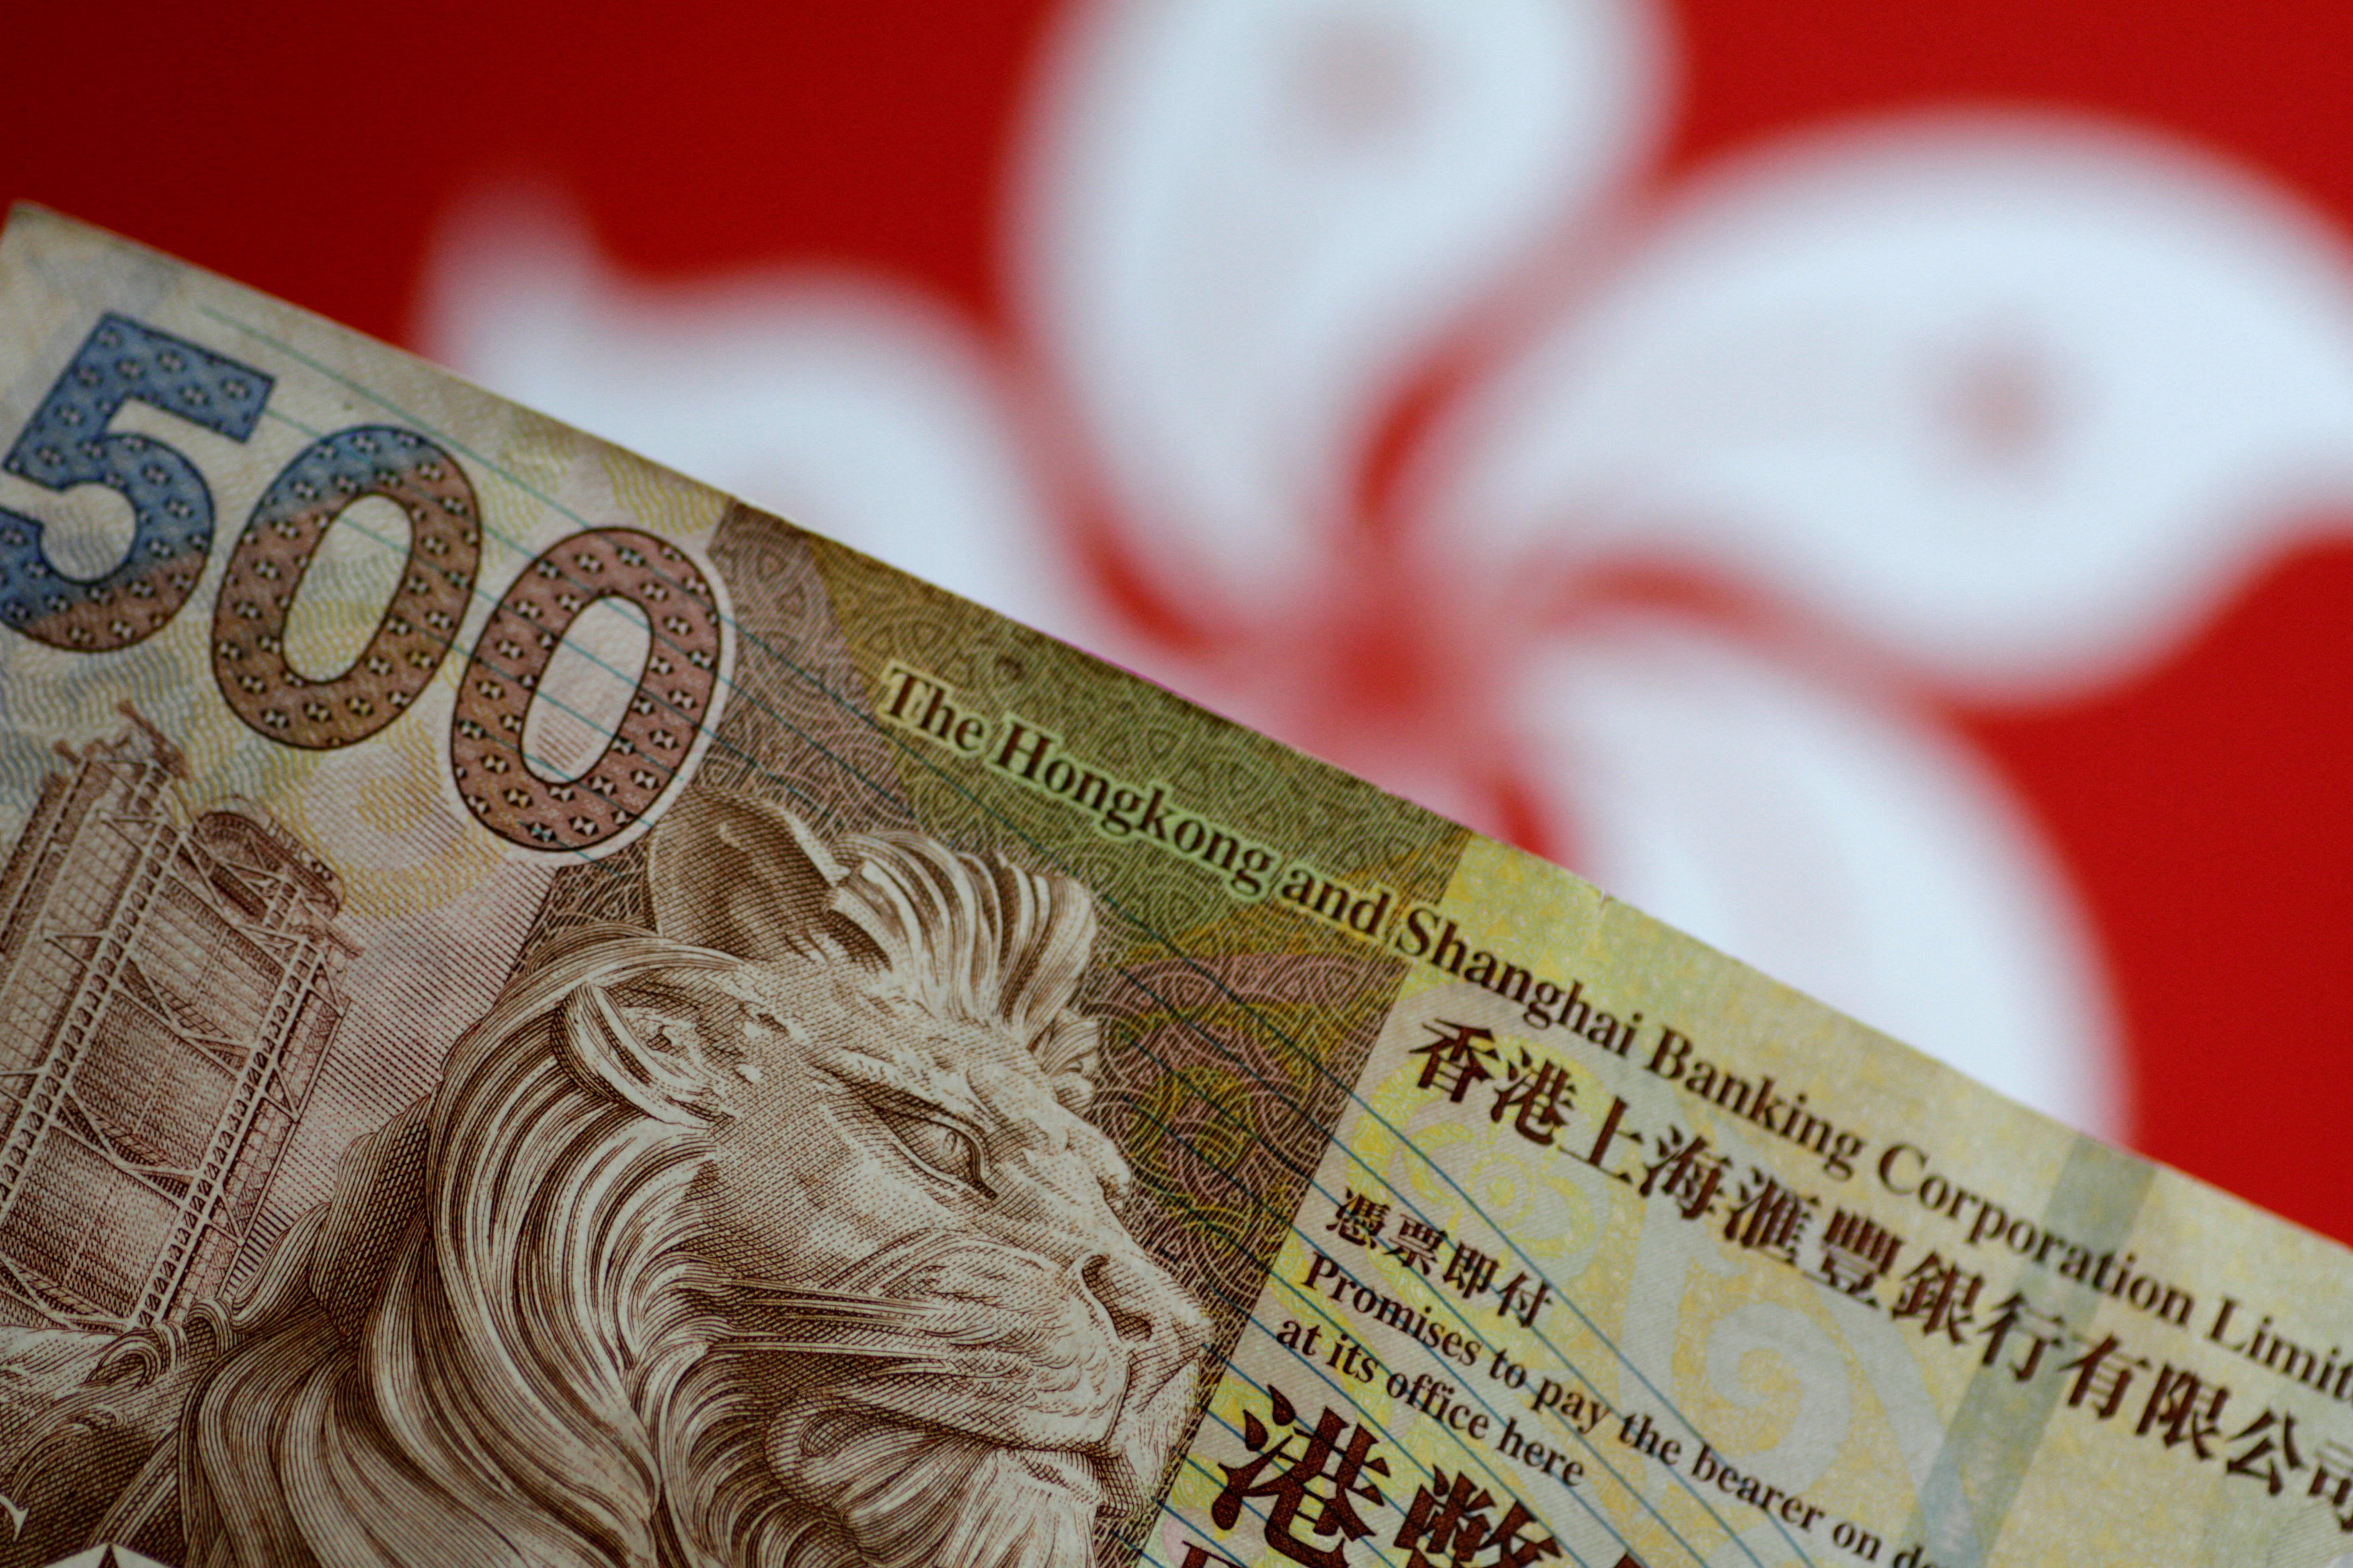 The Hong Kong dollar has been pegged to the US dollar since 1983 and trades in a tight band against the American currency. Photo: Reuters